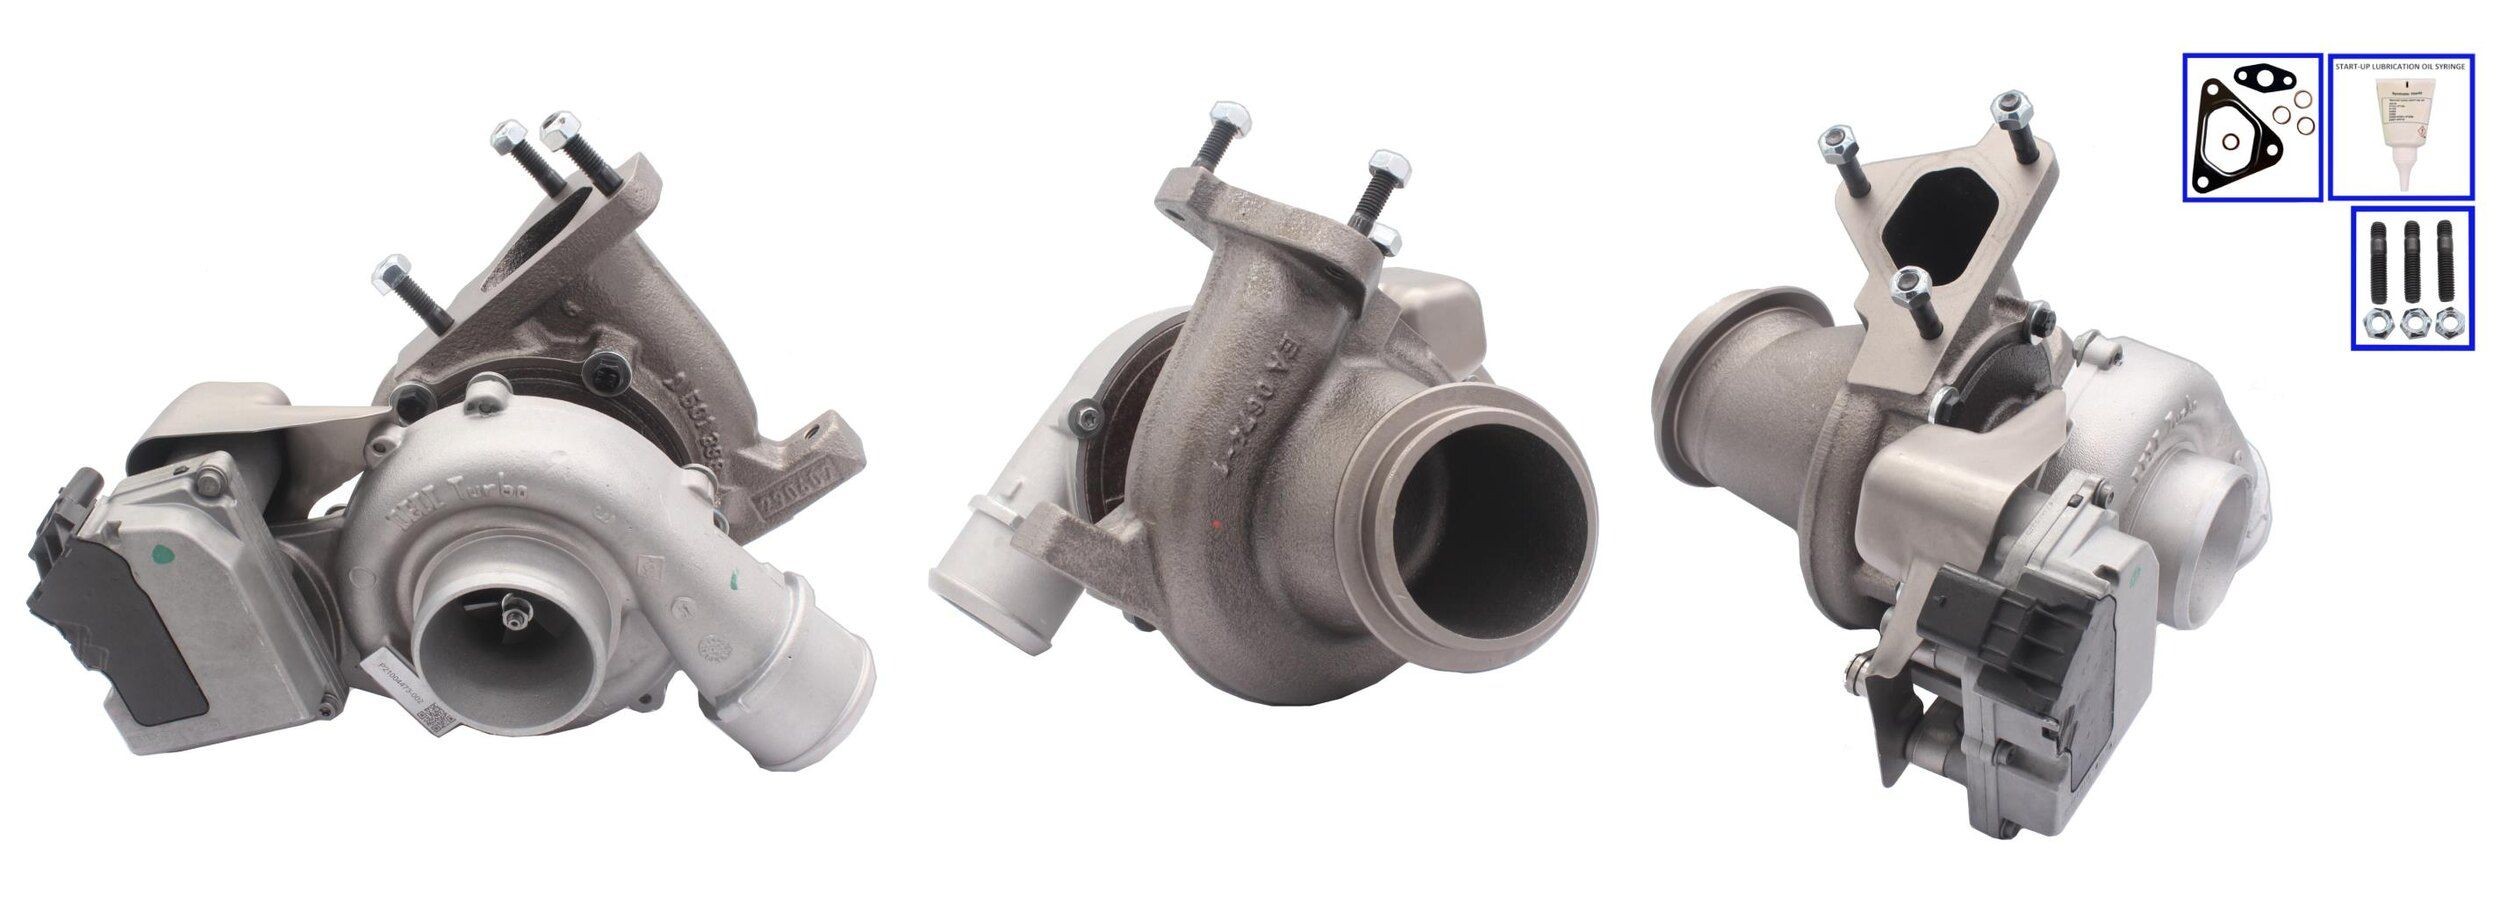 ELSTOCK Exhaust Turbocharger, Electrically controlled actuator, with gaskets/seals Turbo 91-2462 buy